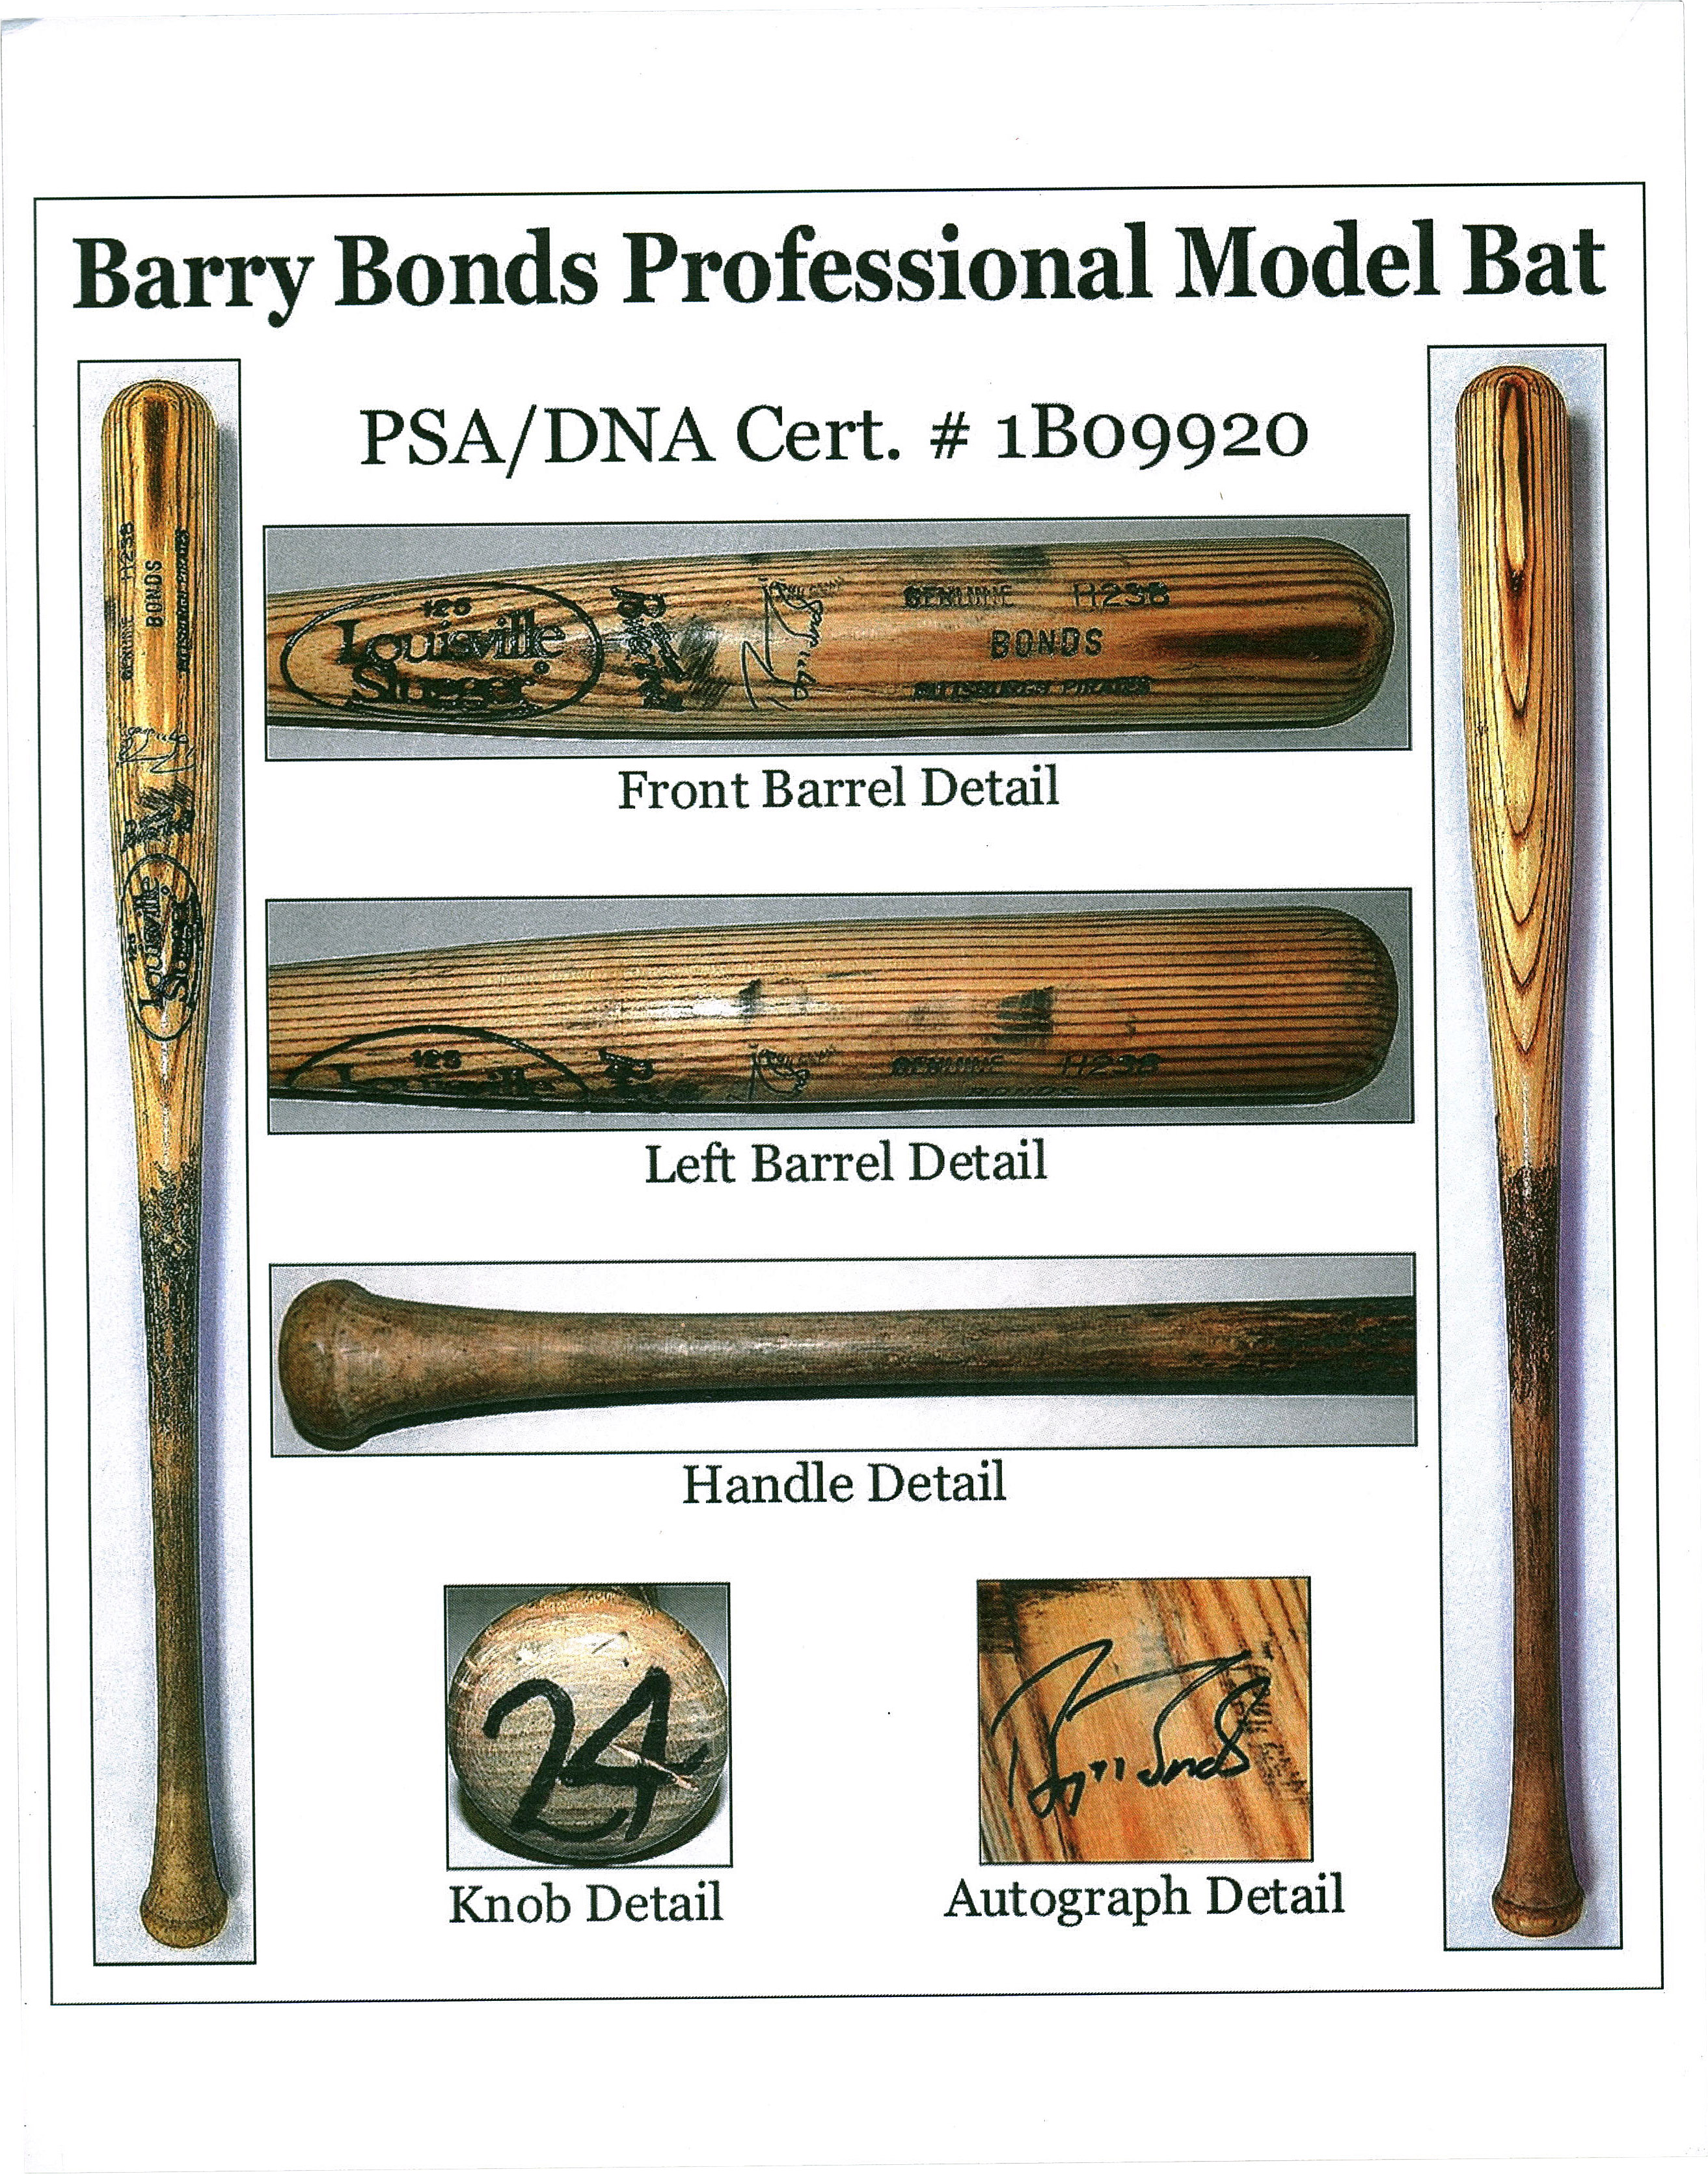 Lot Detail - 1991 Barry Bonds Game Used & Signed Pittsburgh